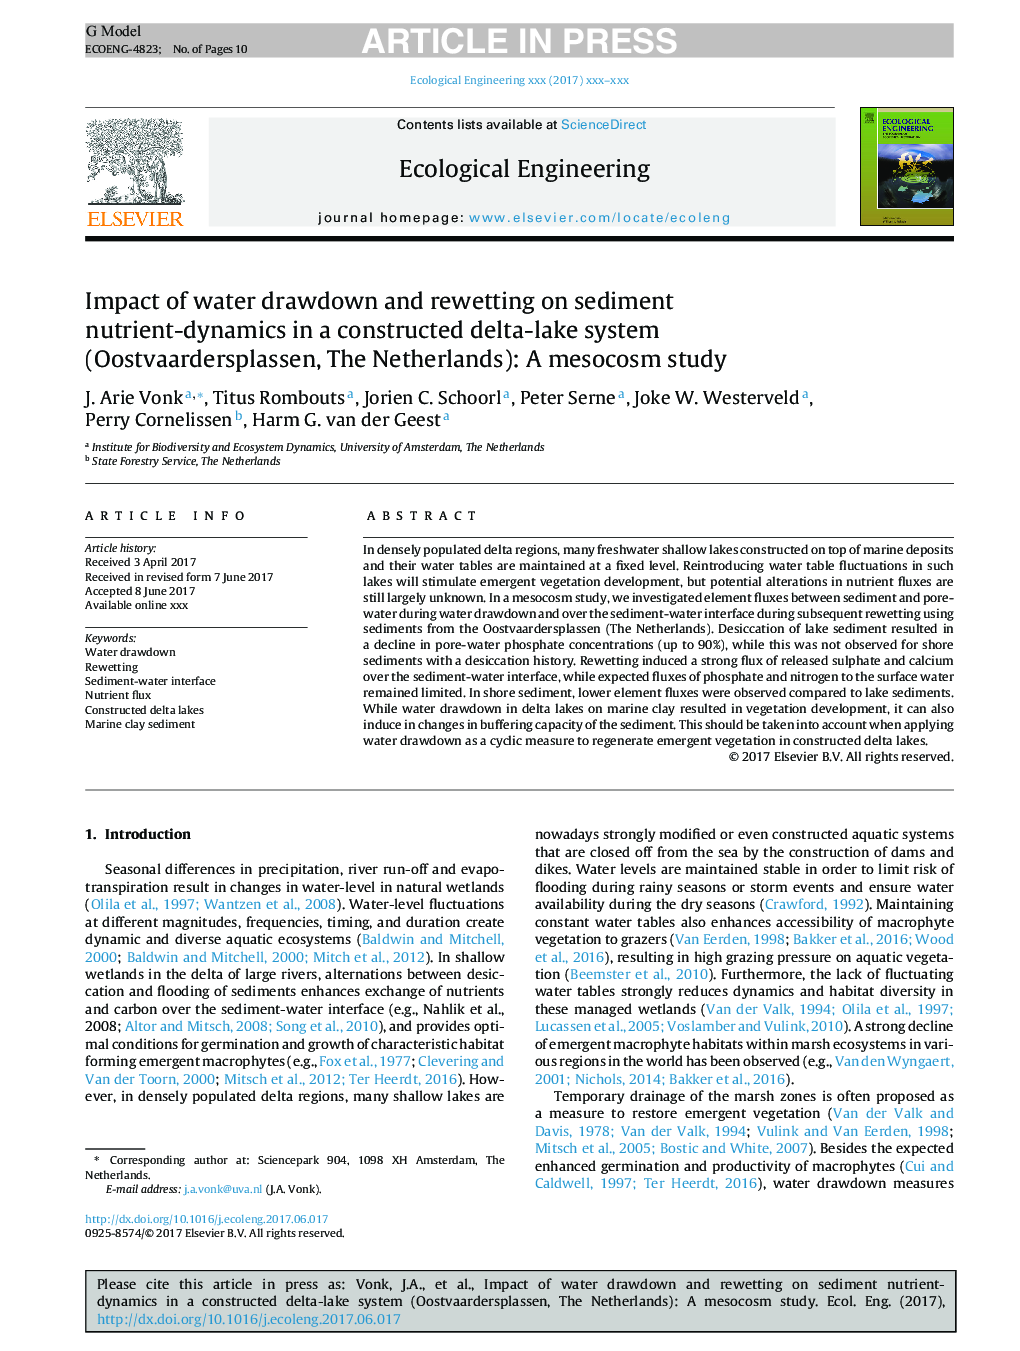 Impact of water drawdown and rewetting on sediment nutrient-dynamics in a constructed delta-lake system (Oostvaardersplassen, The Netherlands): A mesocosm study